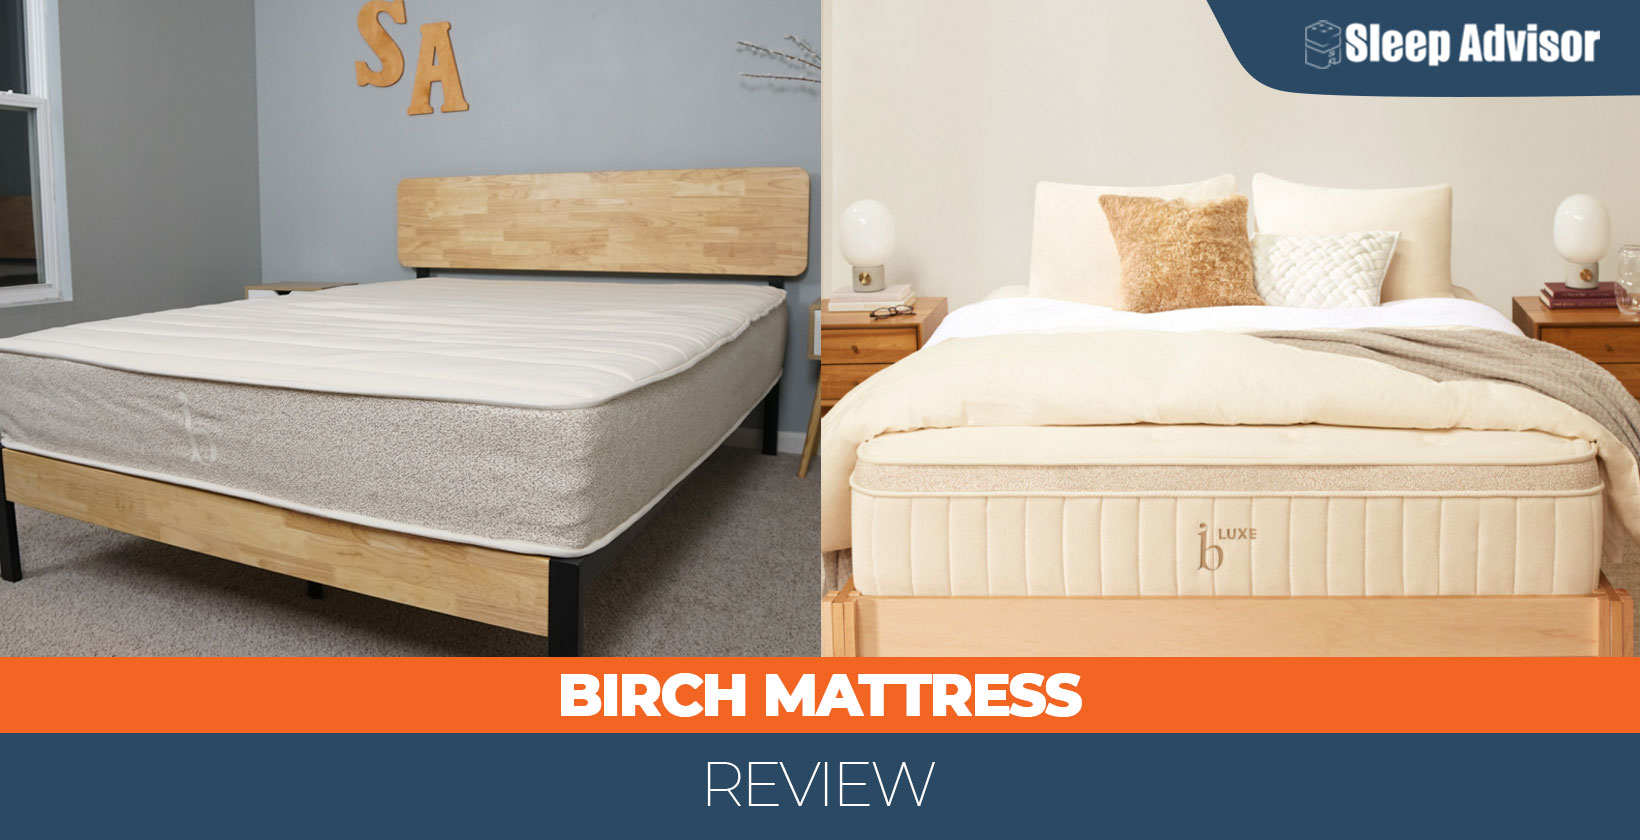 Birch Mattress Review and Prices